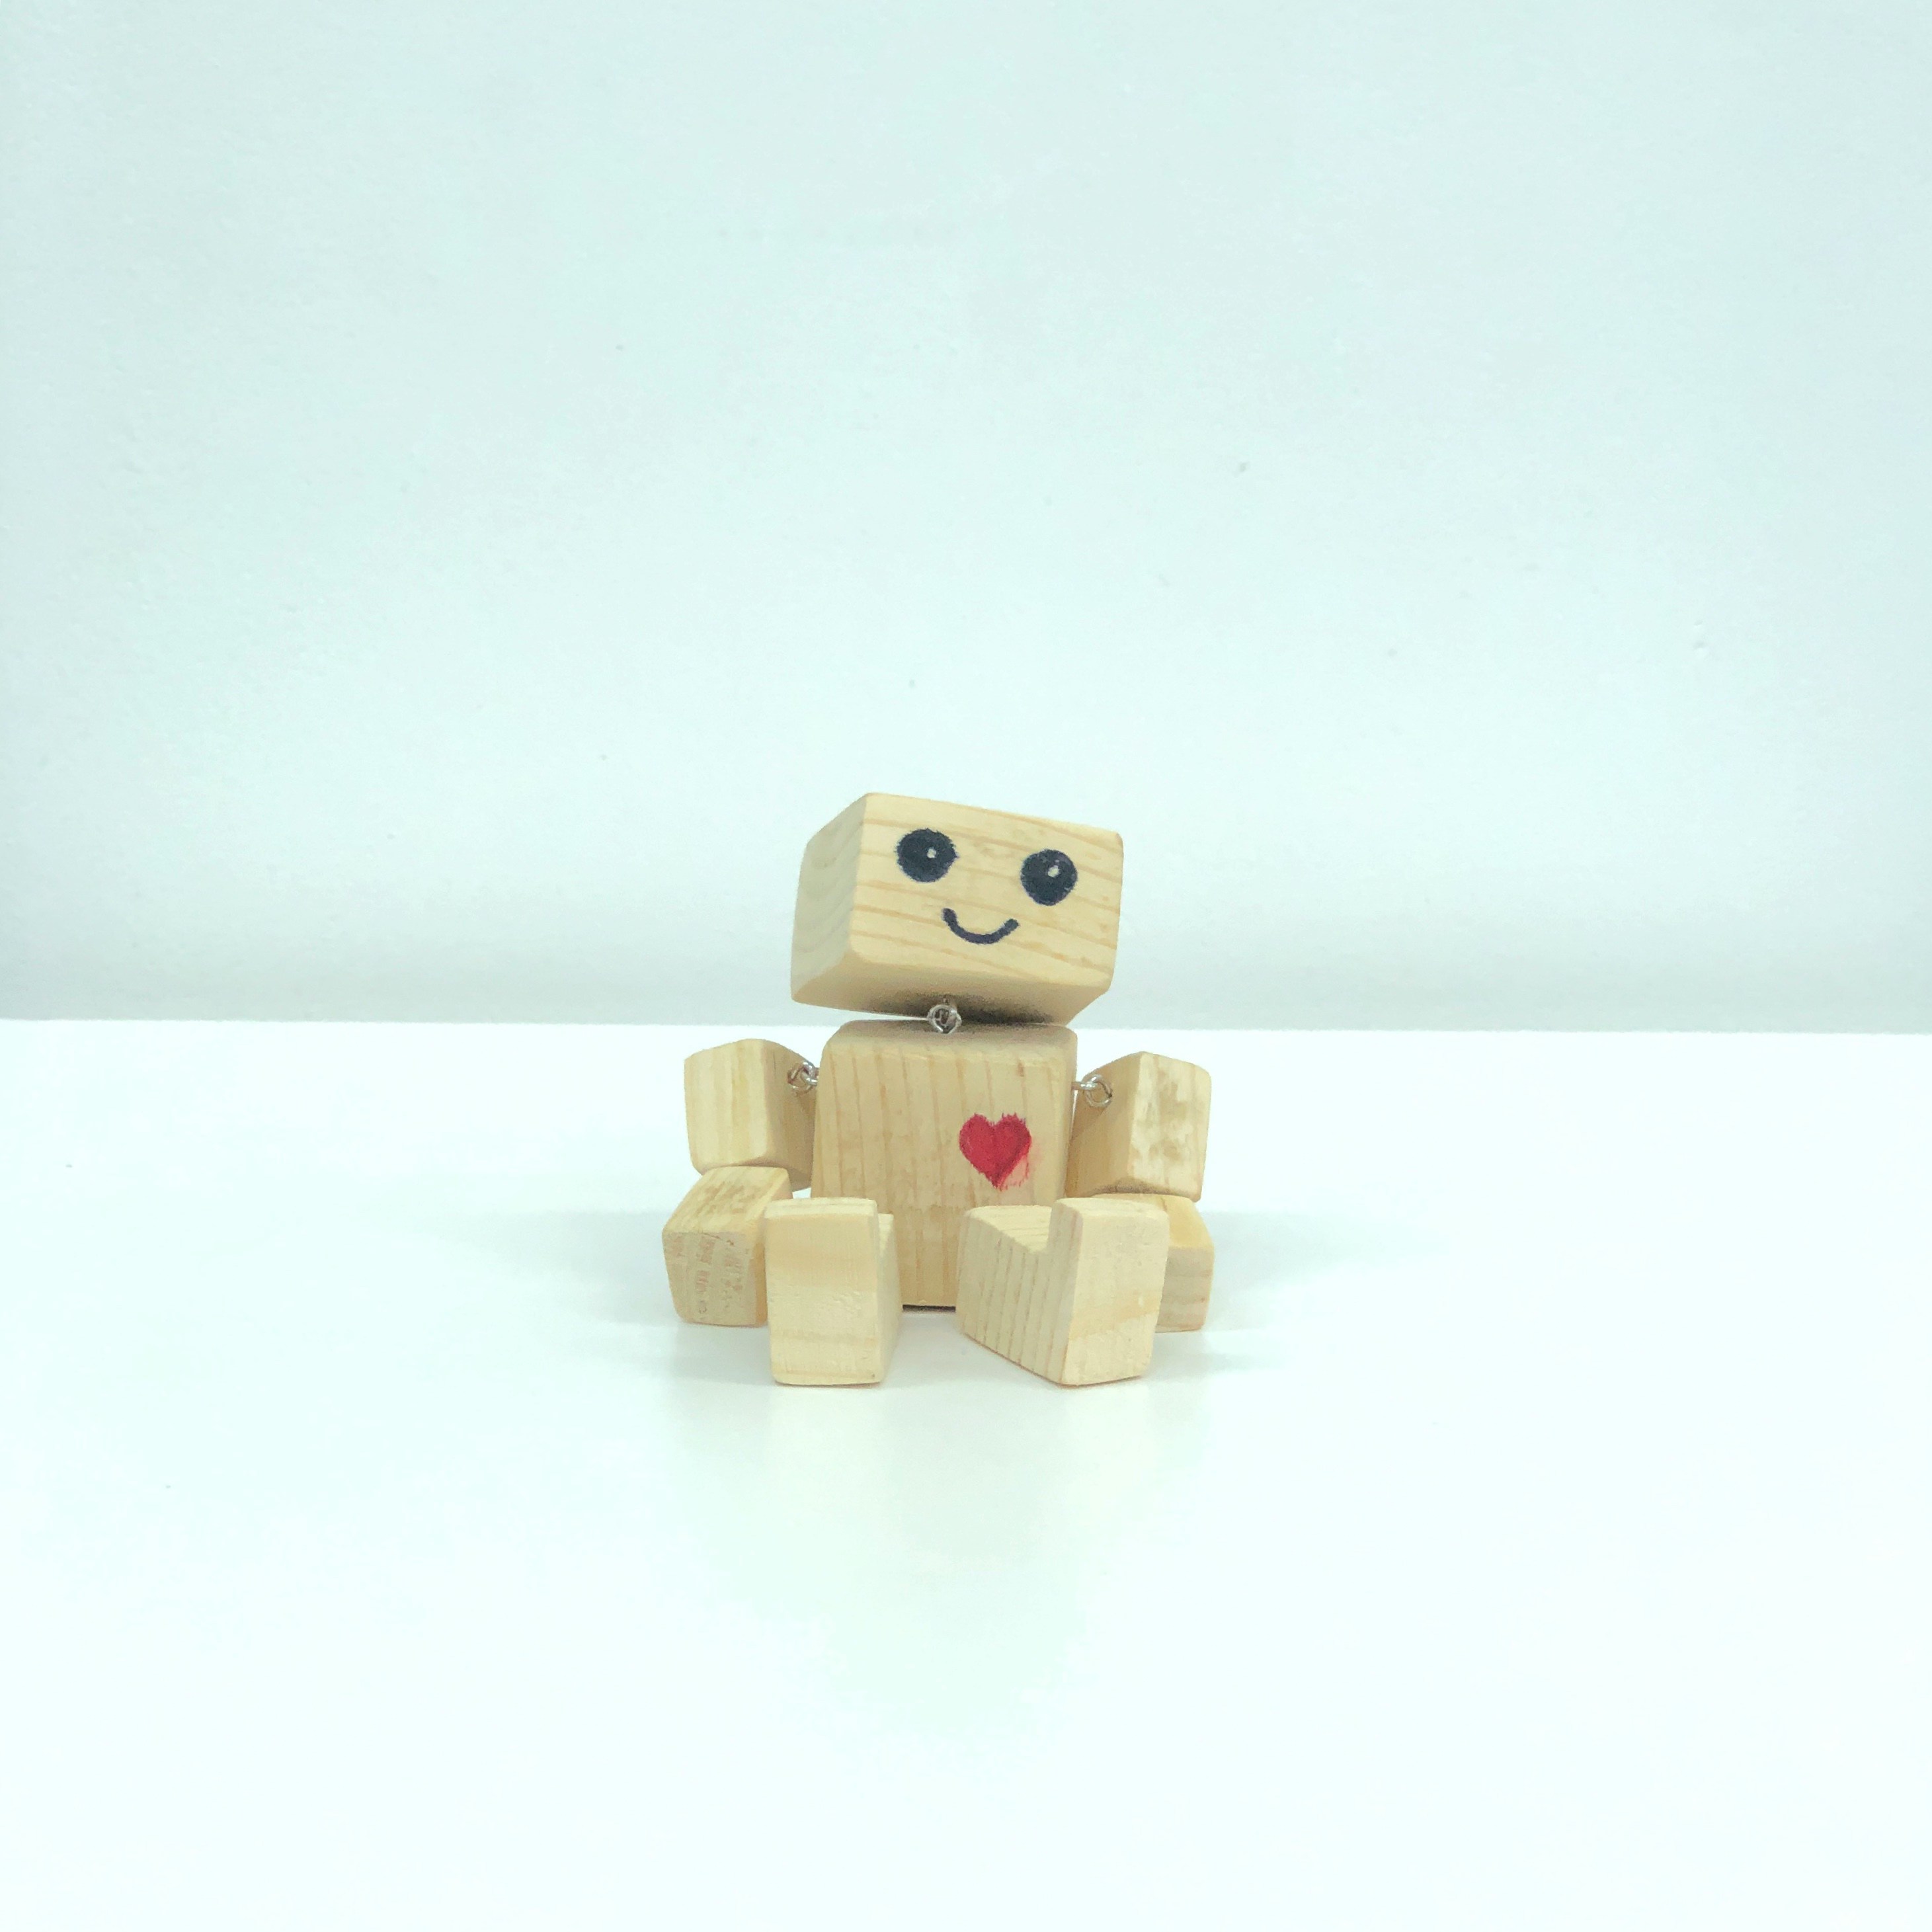 cute wooden "robot" with a heart drawn on the torso